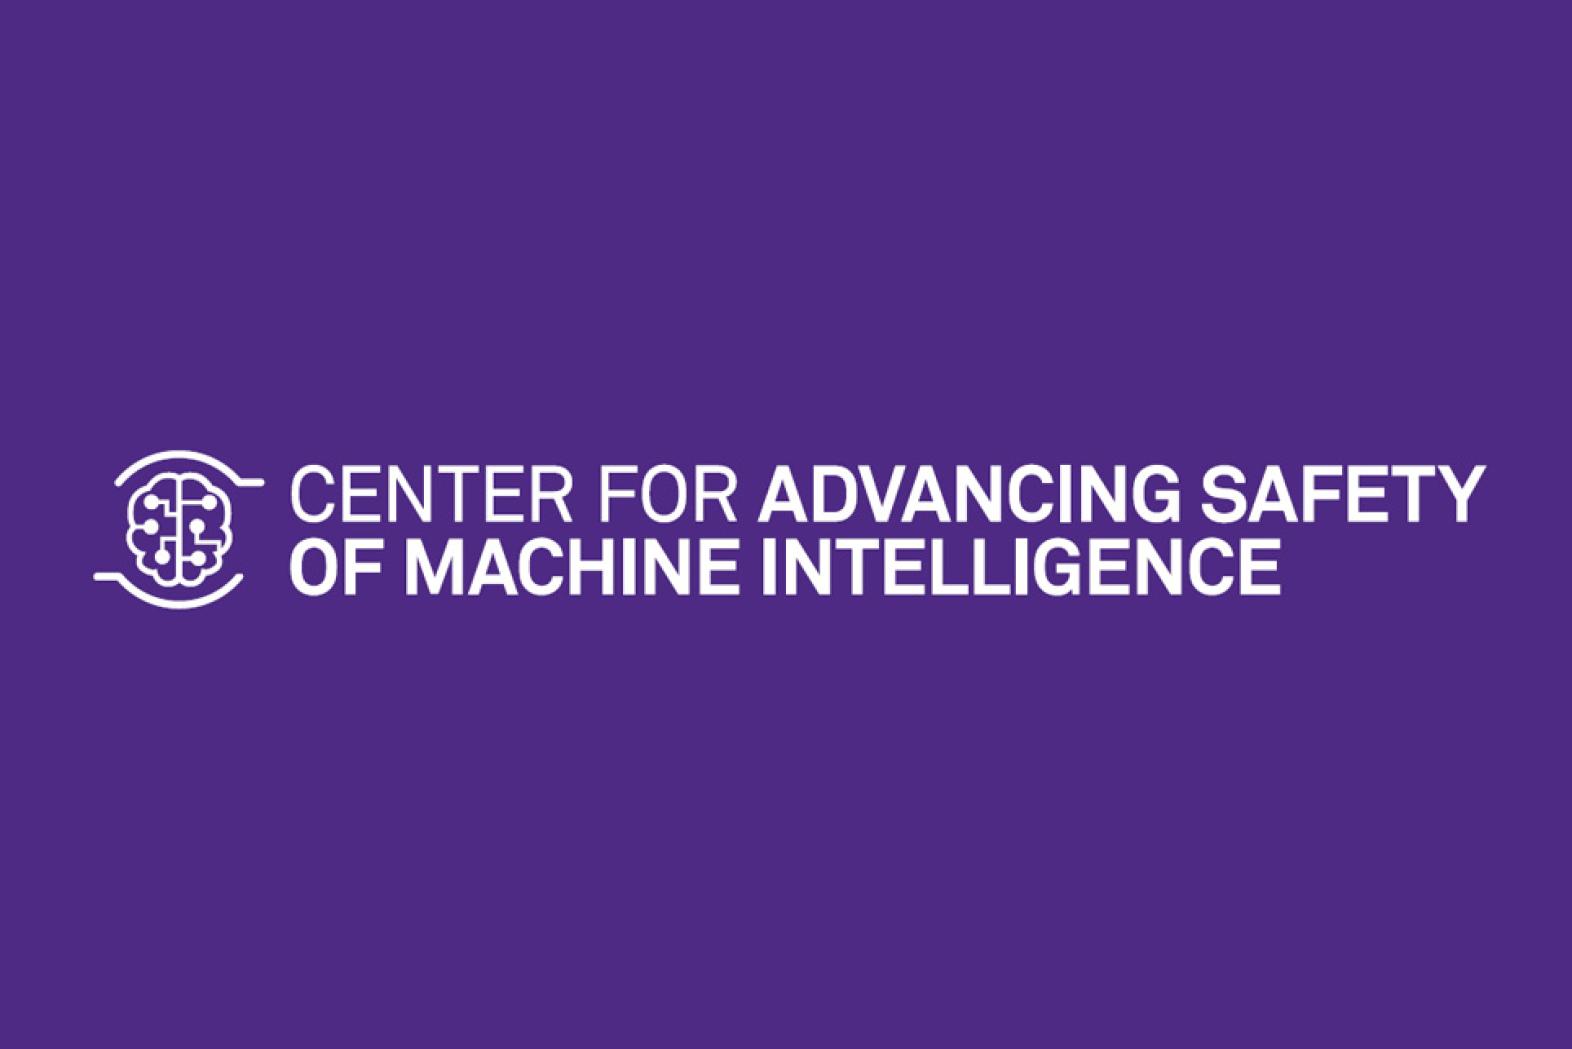 Center for Advancing Safety of Machine Intelligence